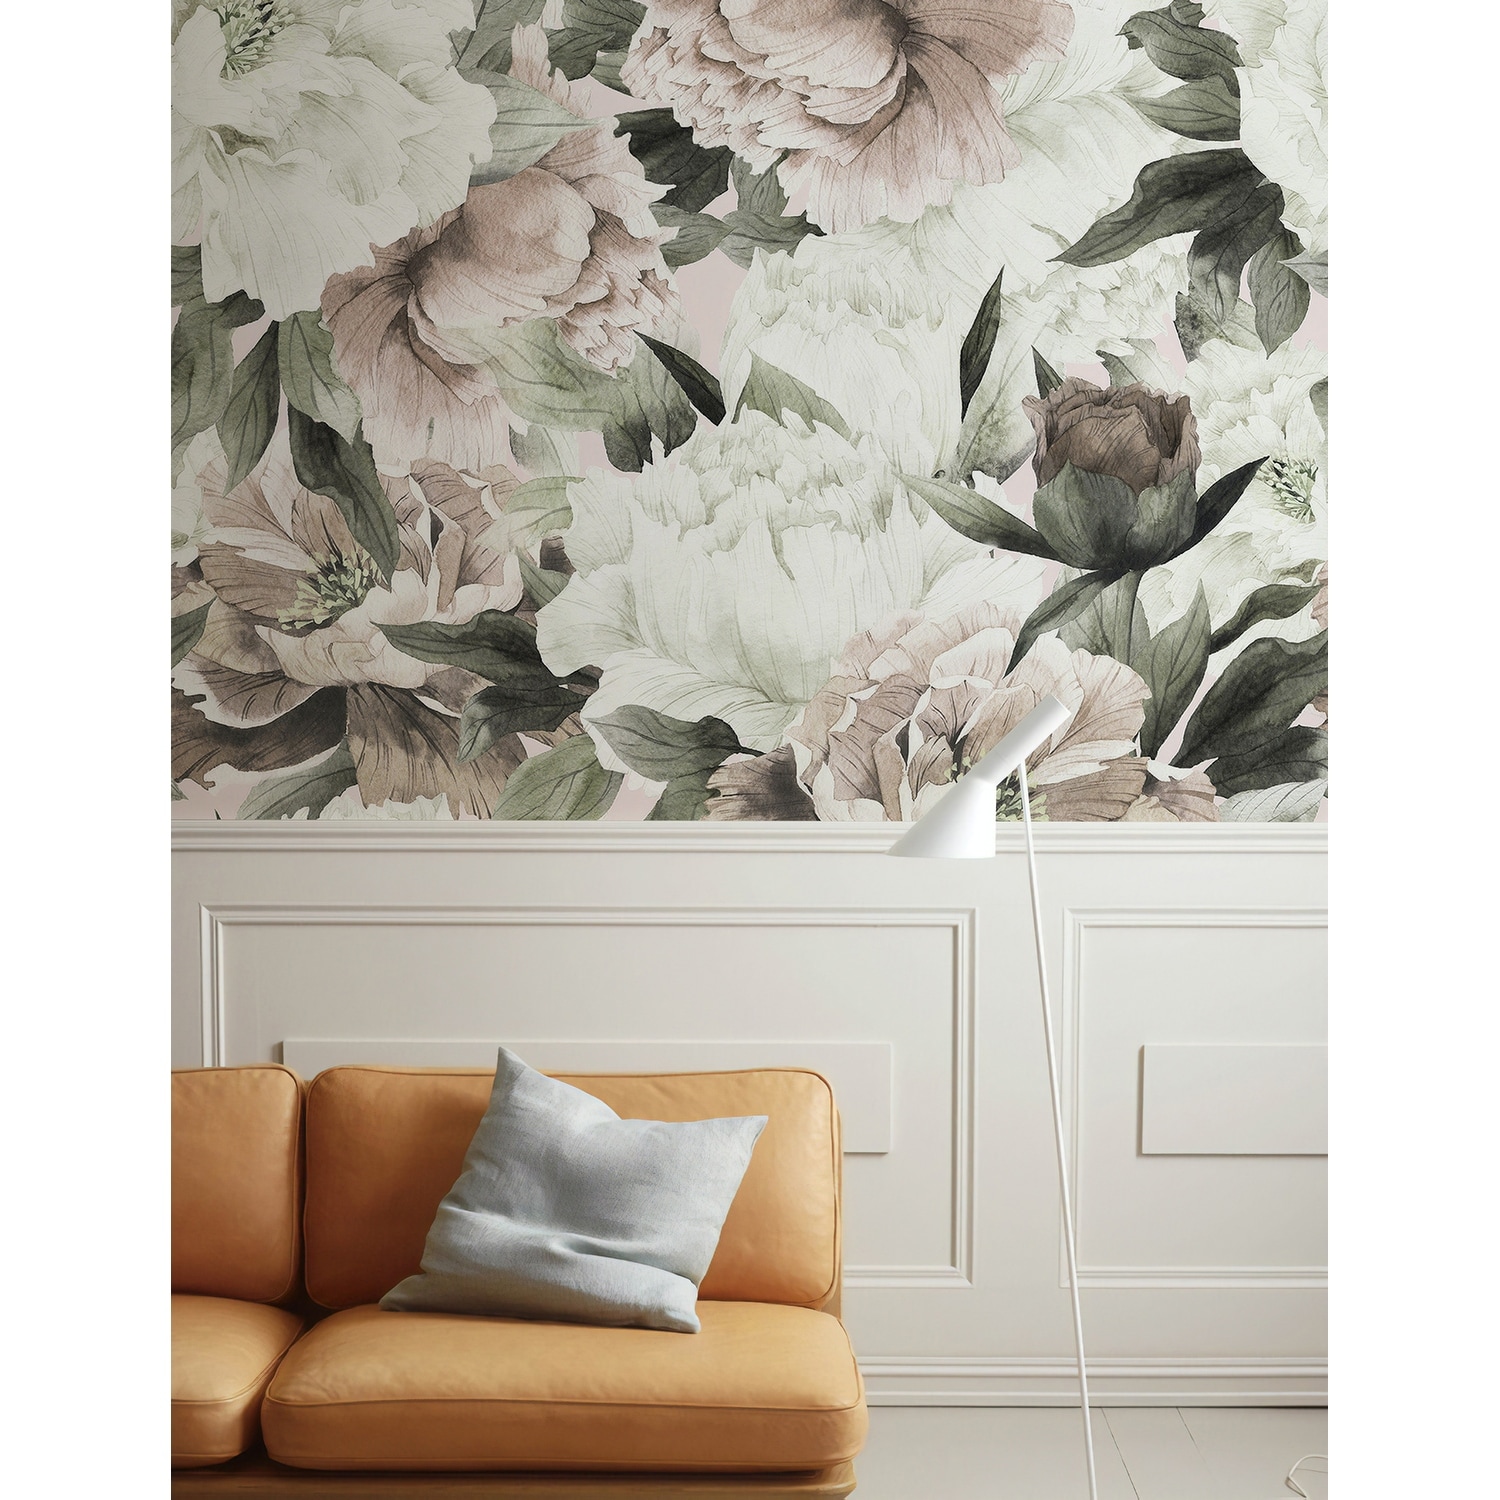 Pin on Floral Wall Murals